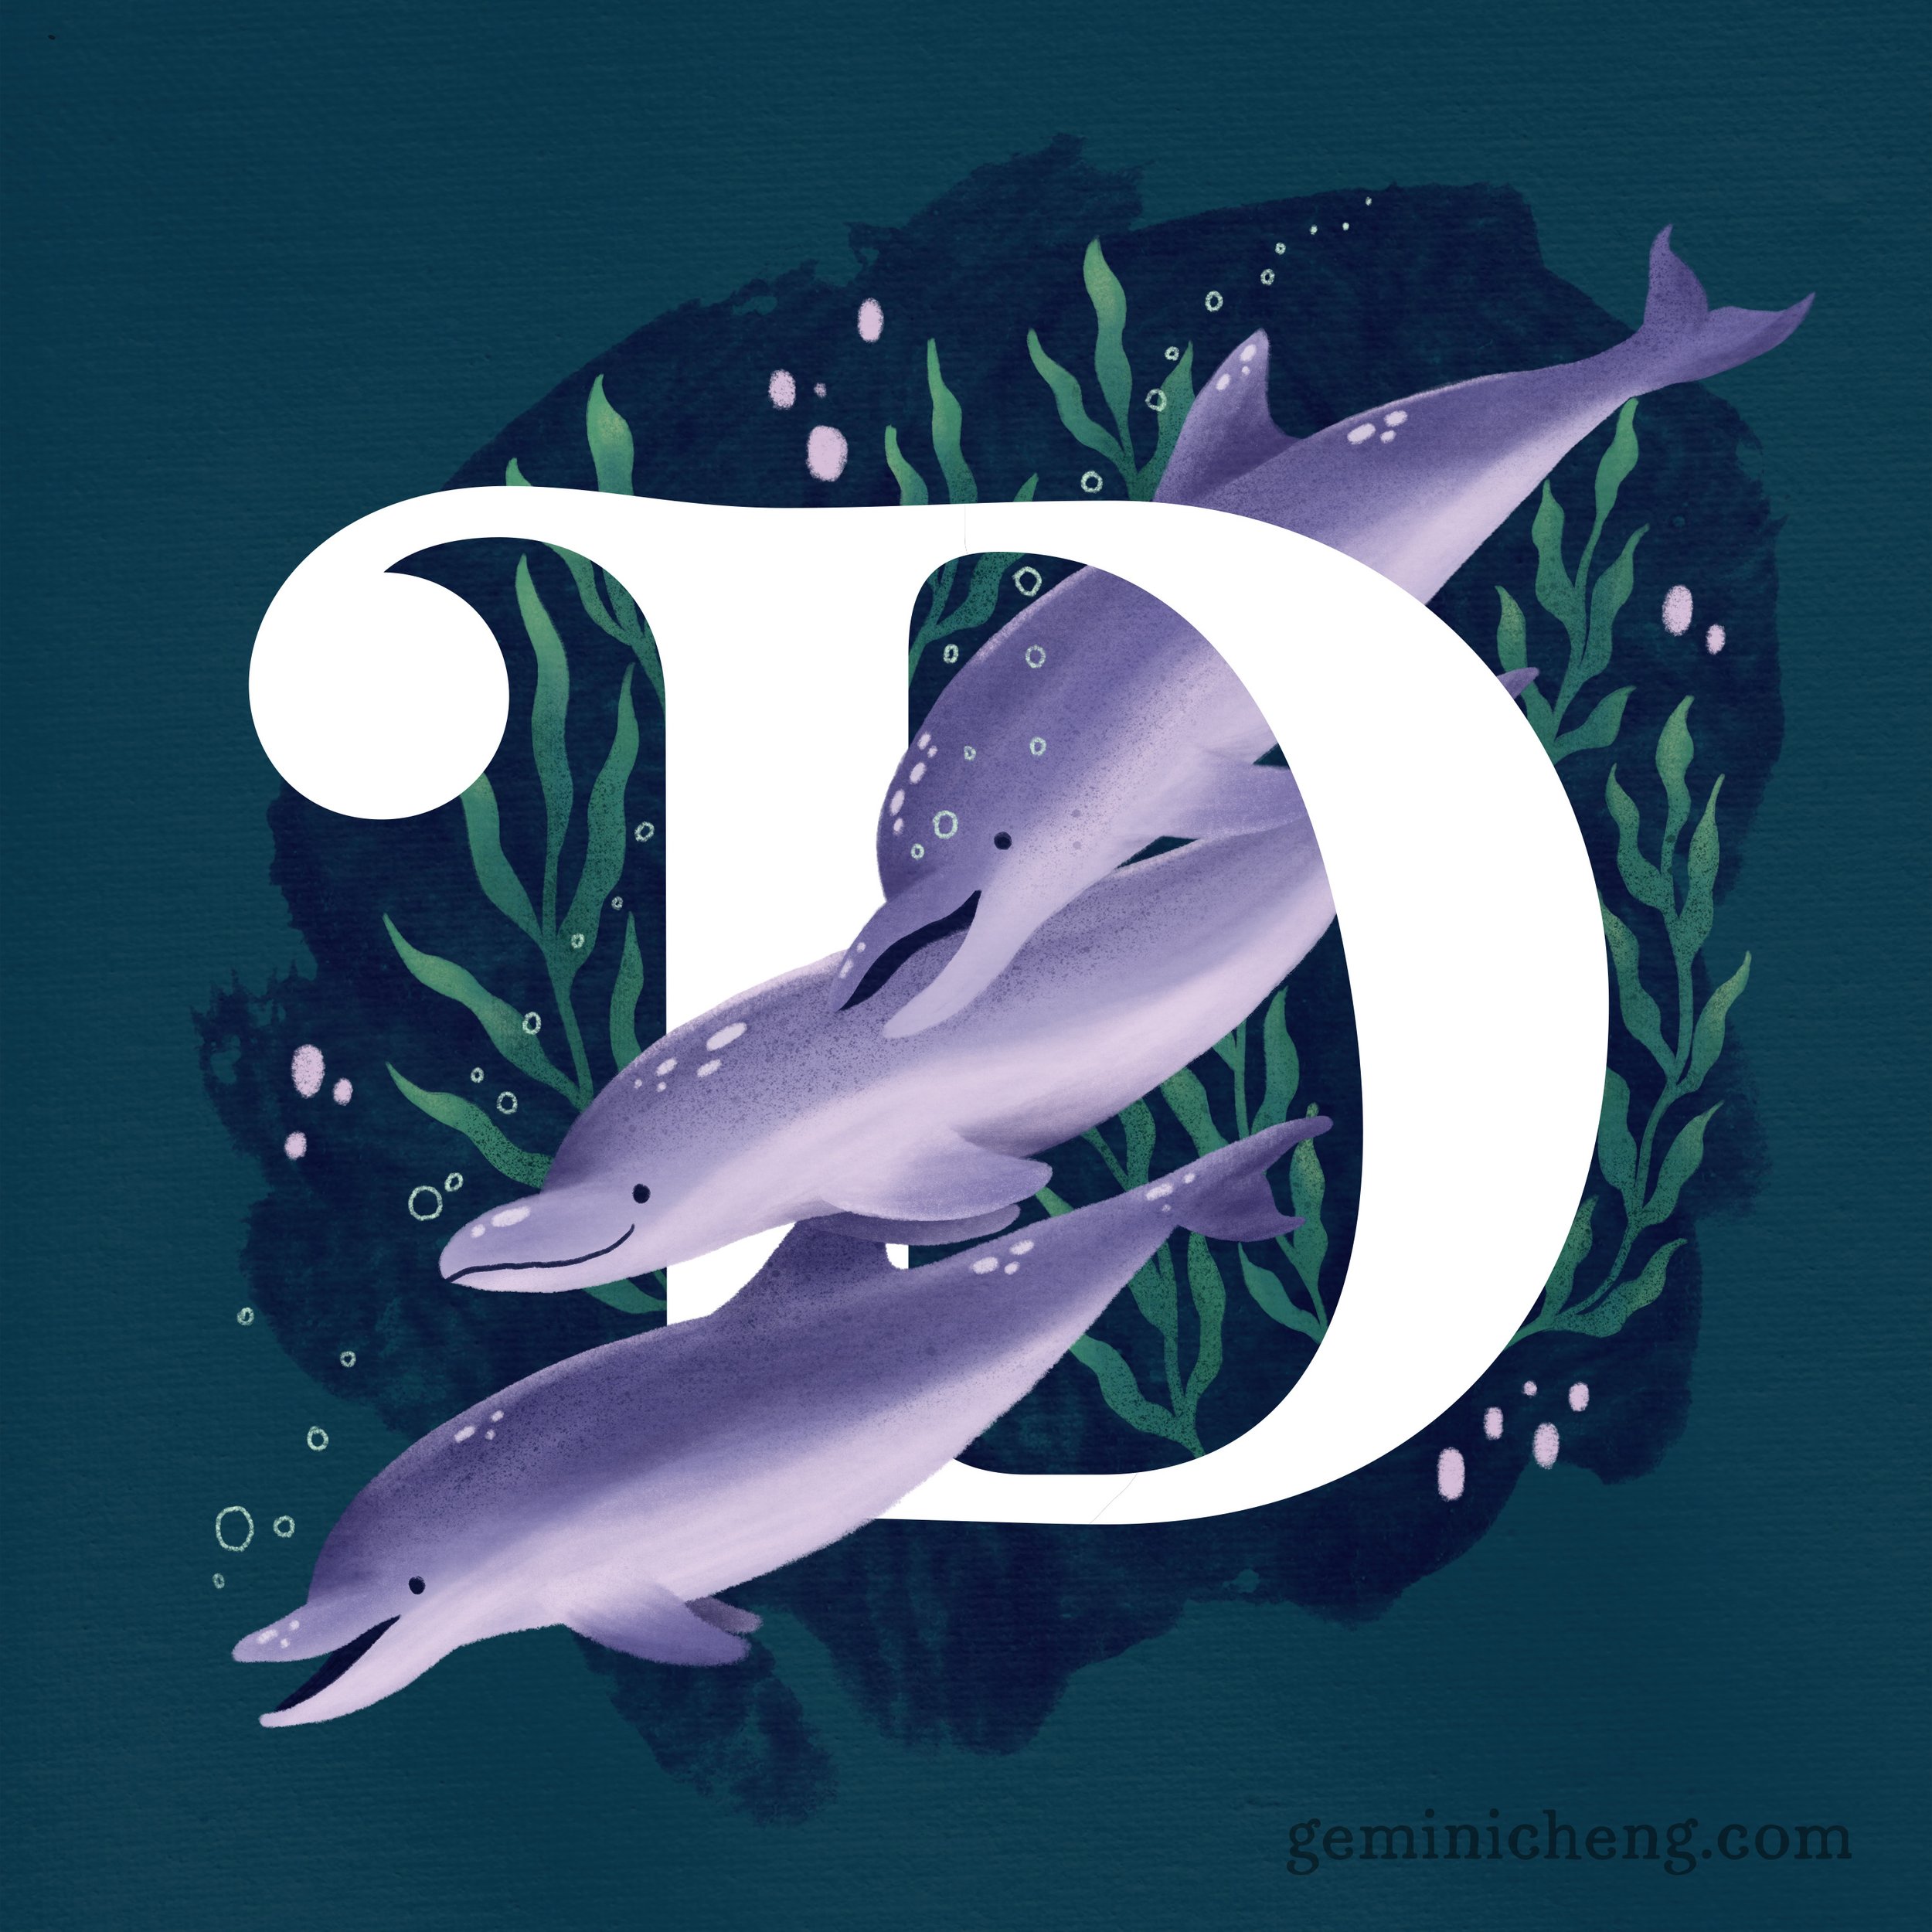 D for Dolphins_1080.jpg